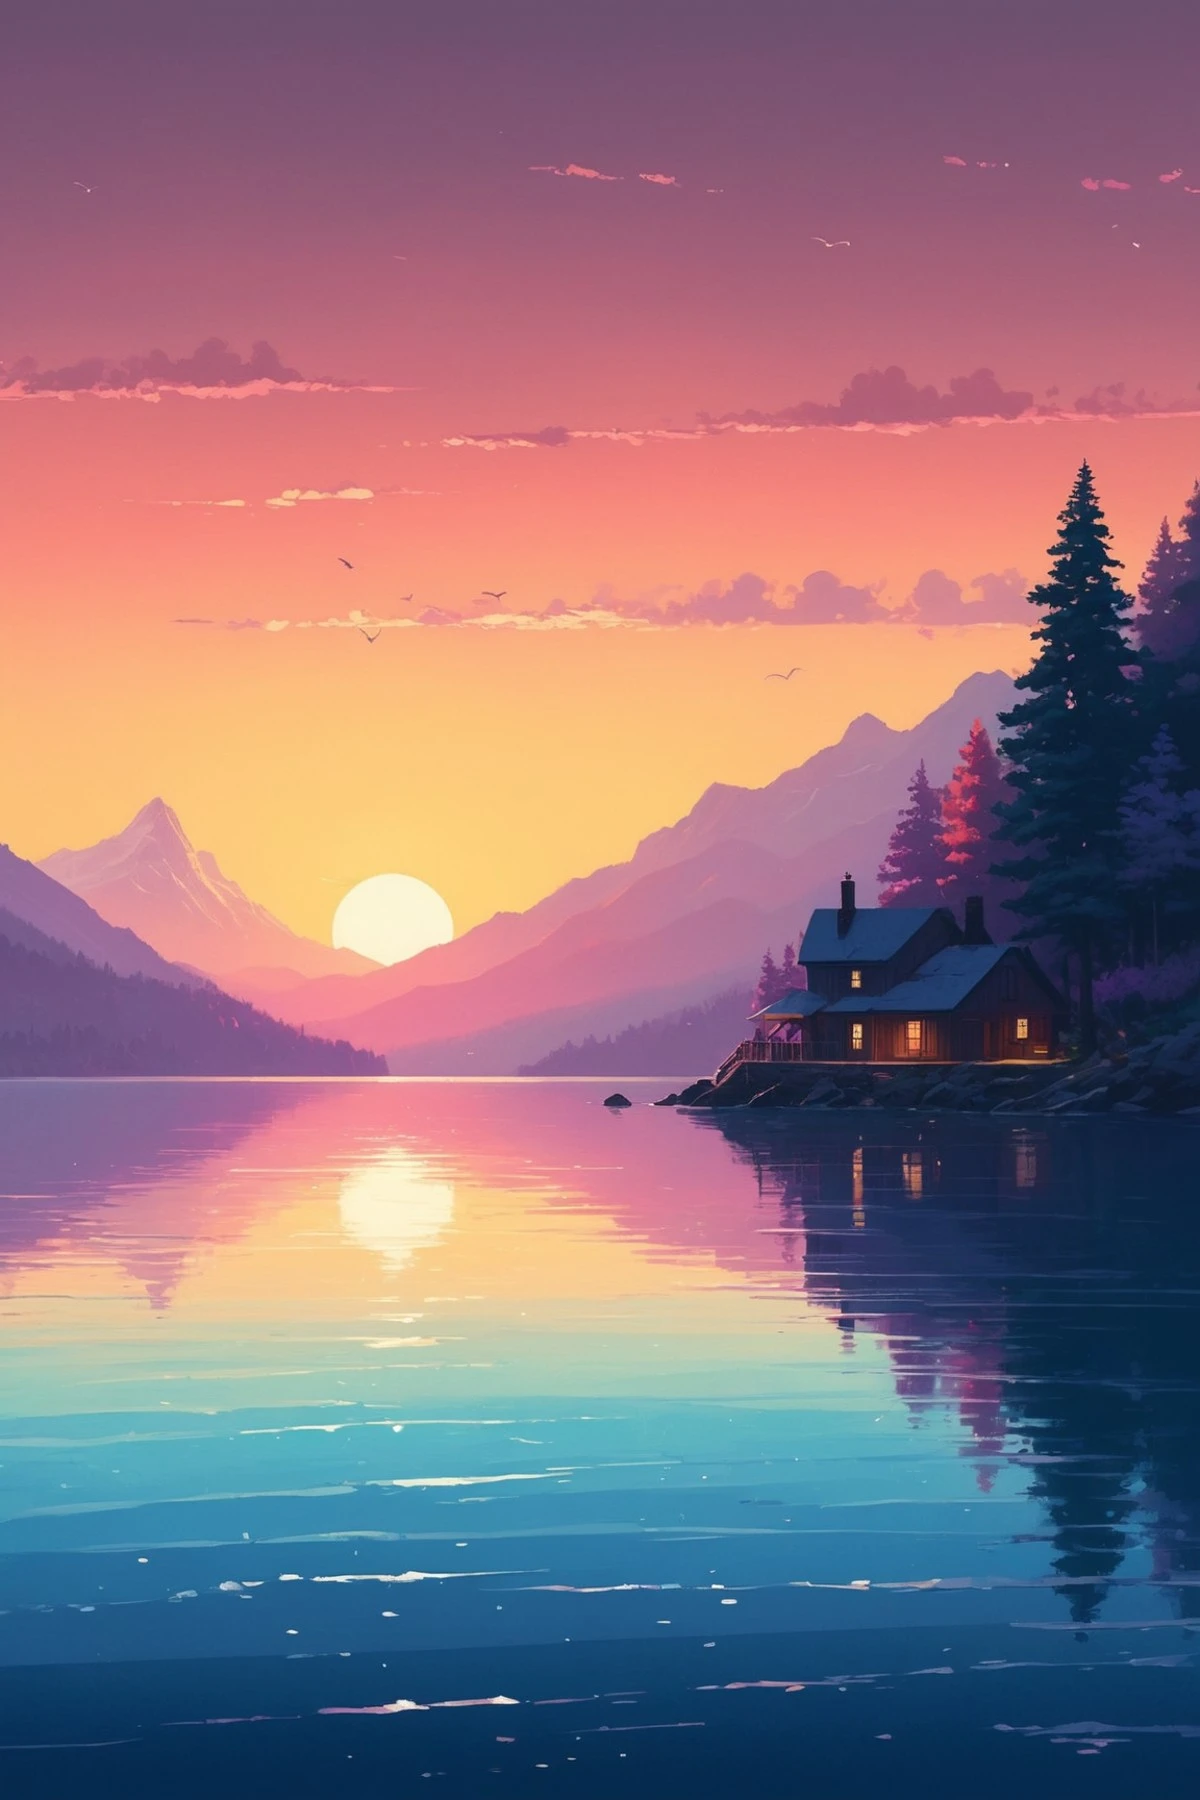 A serene lakeside at sunset. A small cabin with lit windows nestles among tall pine trees. The calm lake reflects the vibrant hues of pink, purple, and orange from the sky, while distant mountains add to the tranquility of the setting. 